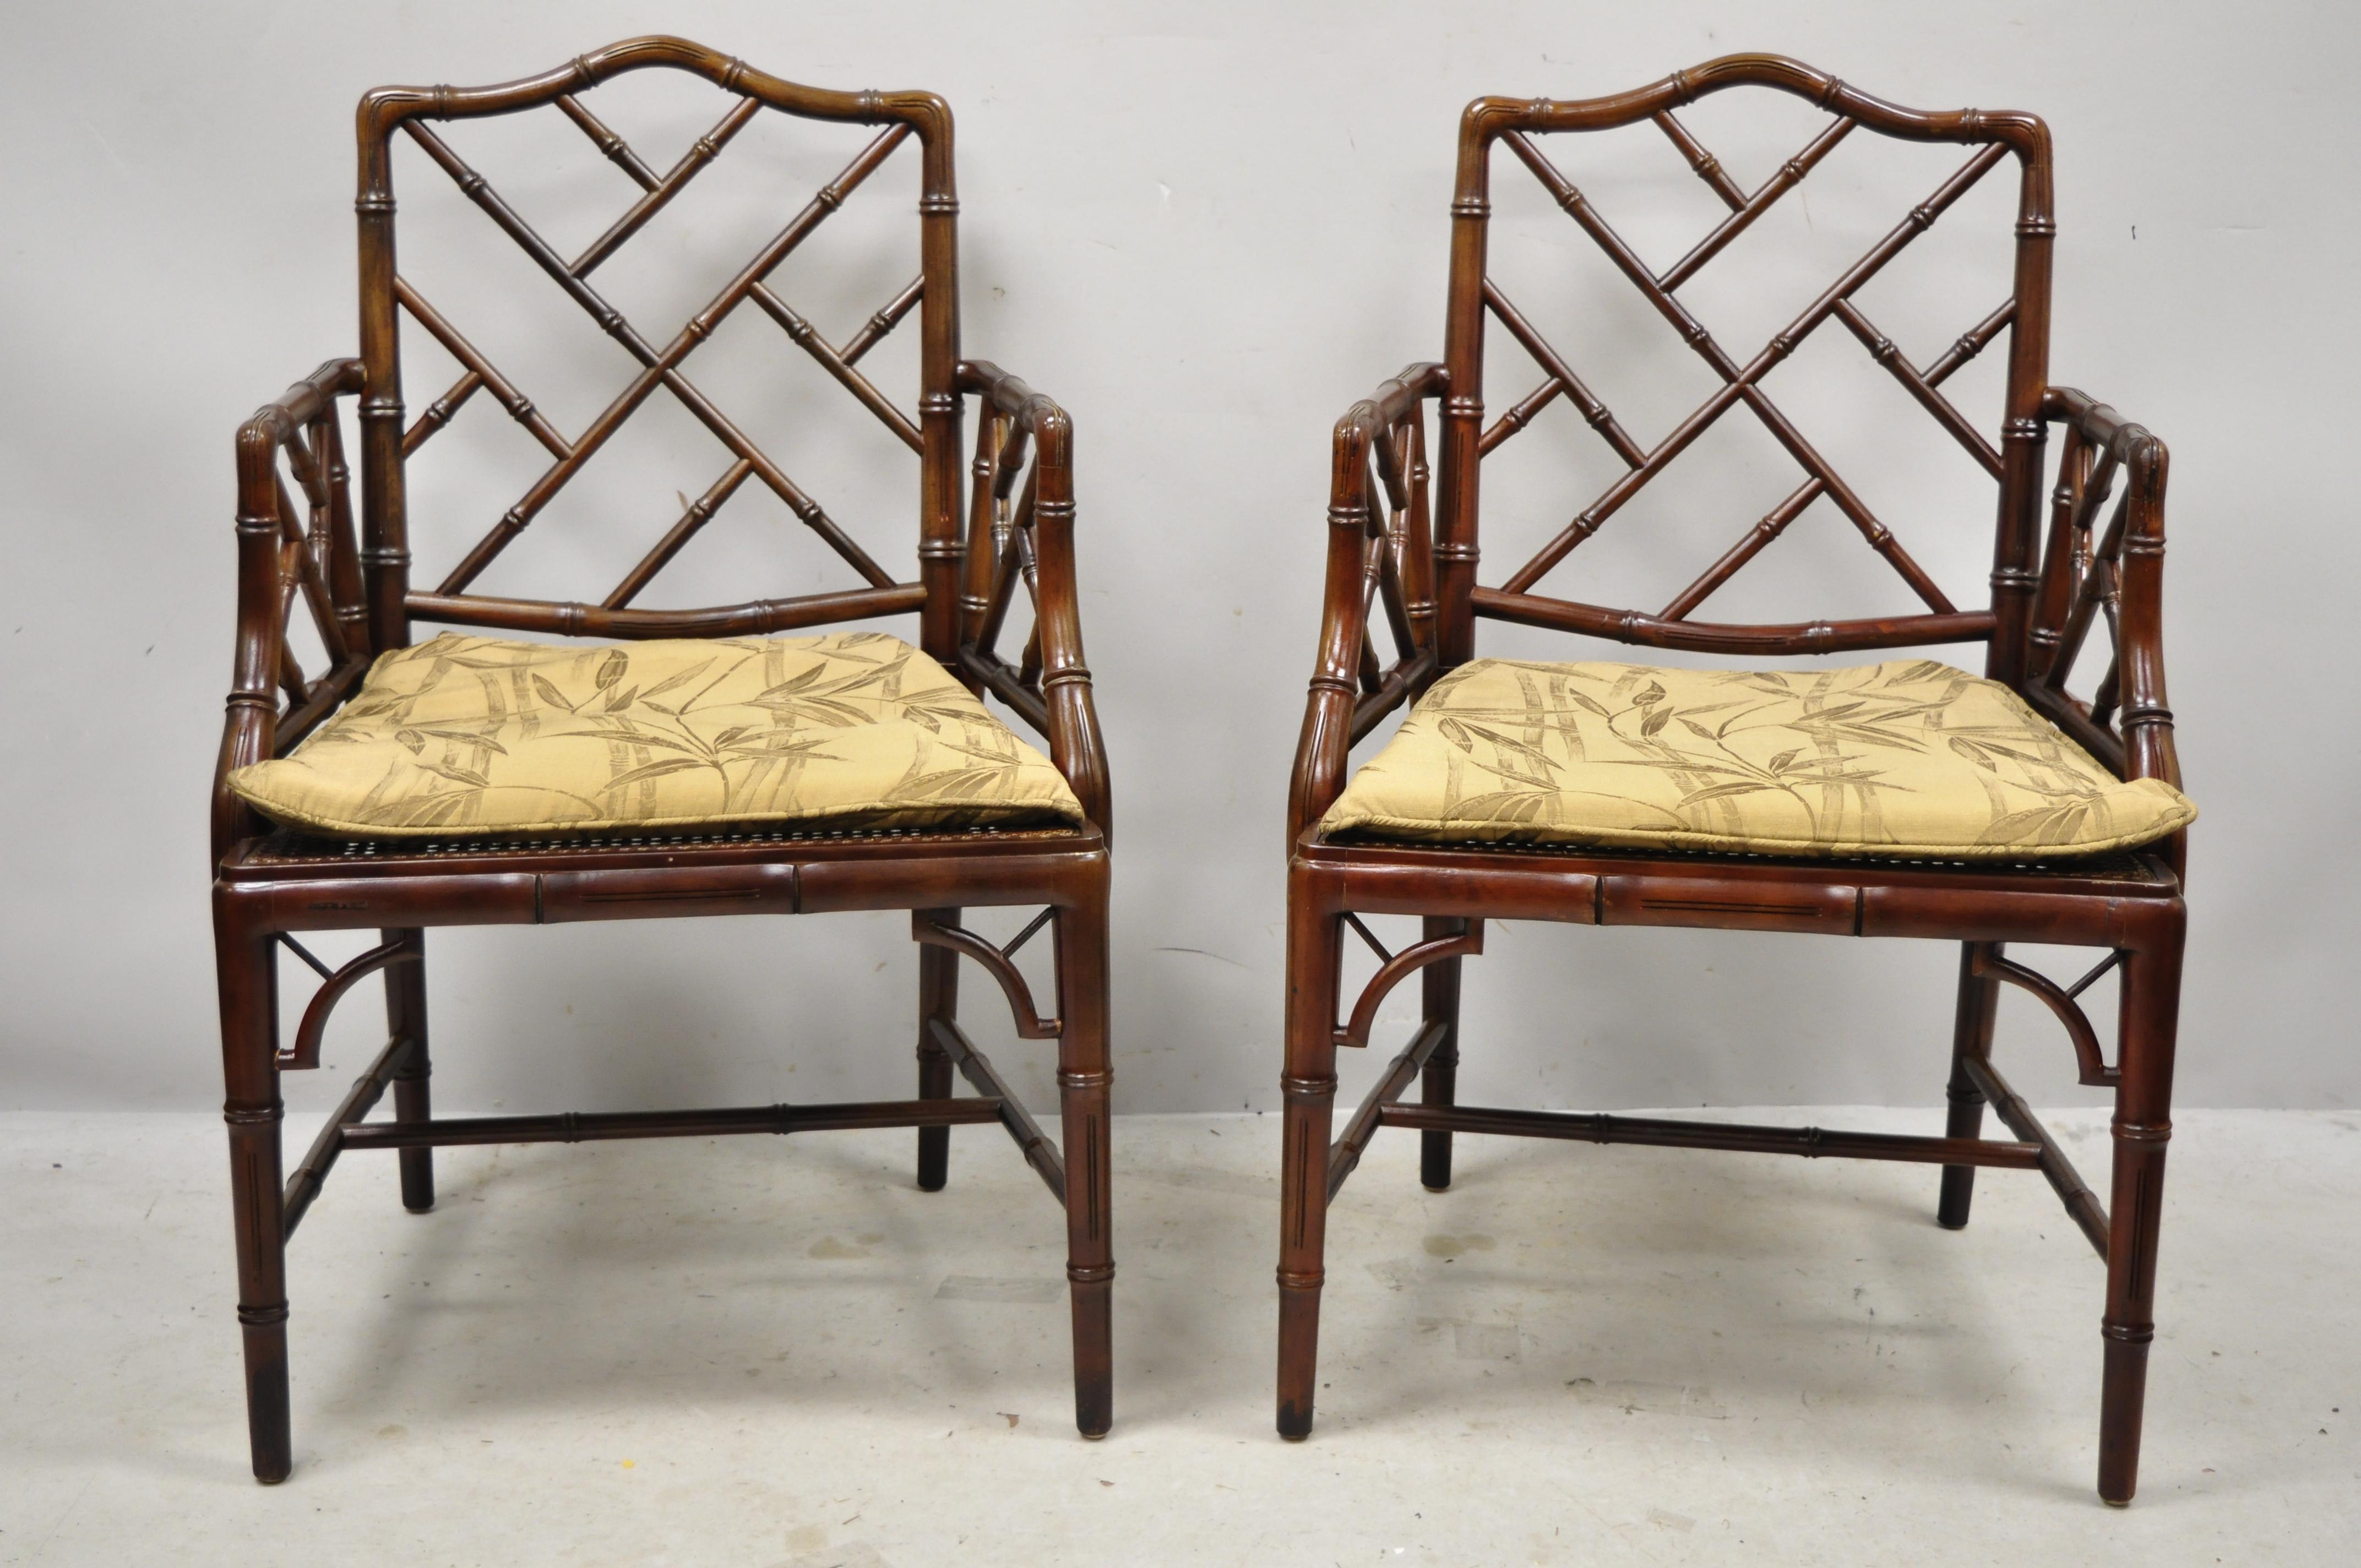 Vintage Chinese Chippendale faux bamboo Hollywood Regency cane armchairs (A) - a pair. Item features solid wood frame, distressed finish, nicely carved details, cane seat, quality American craftsmanship, great style and form, circa mid-late 20th